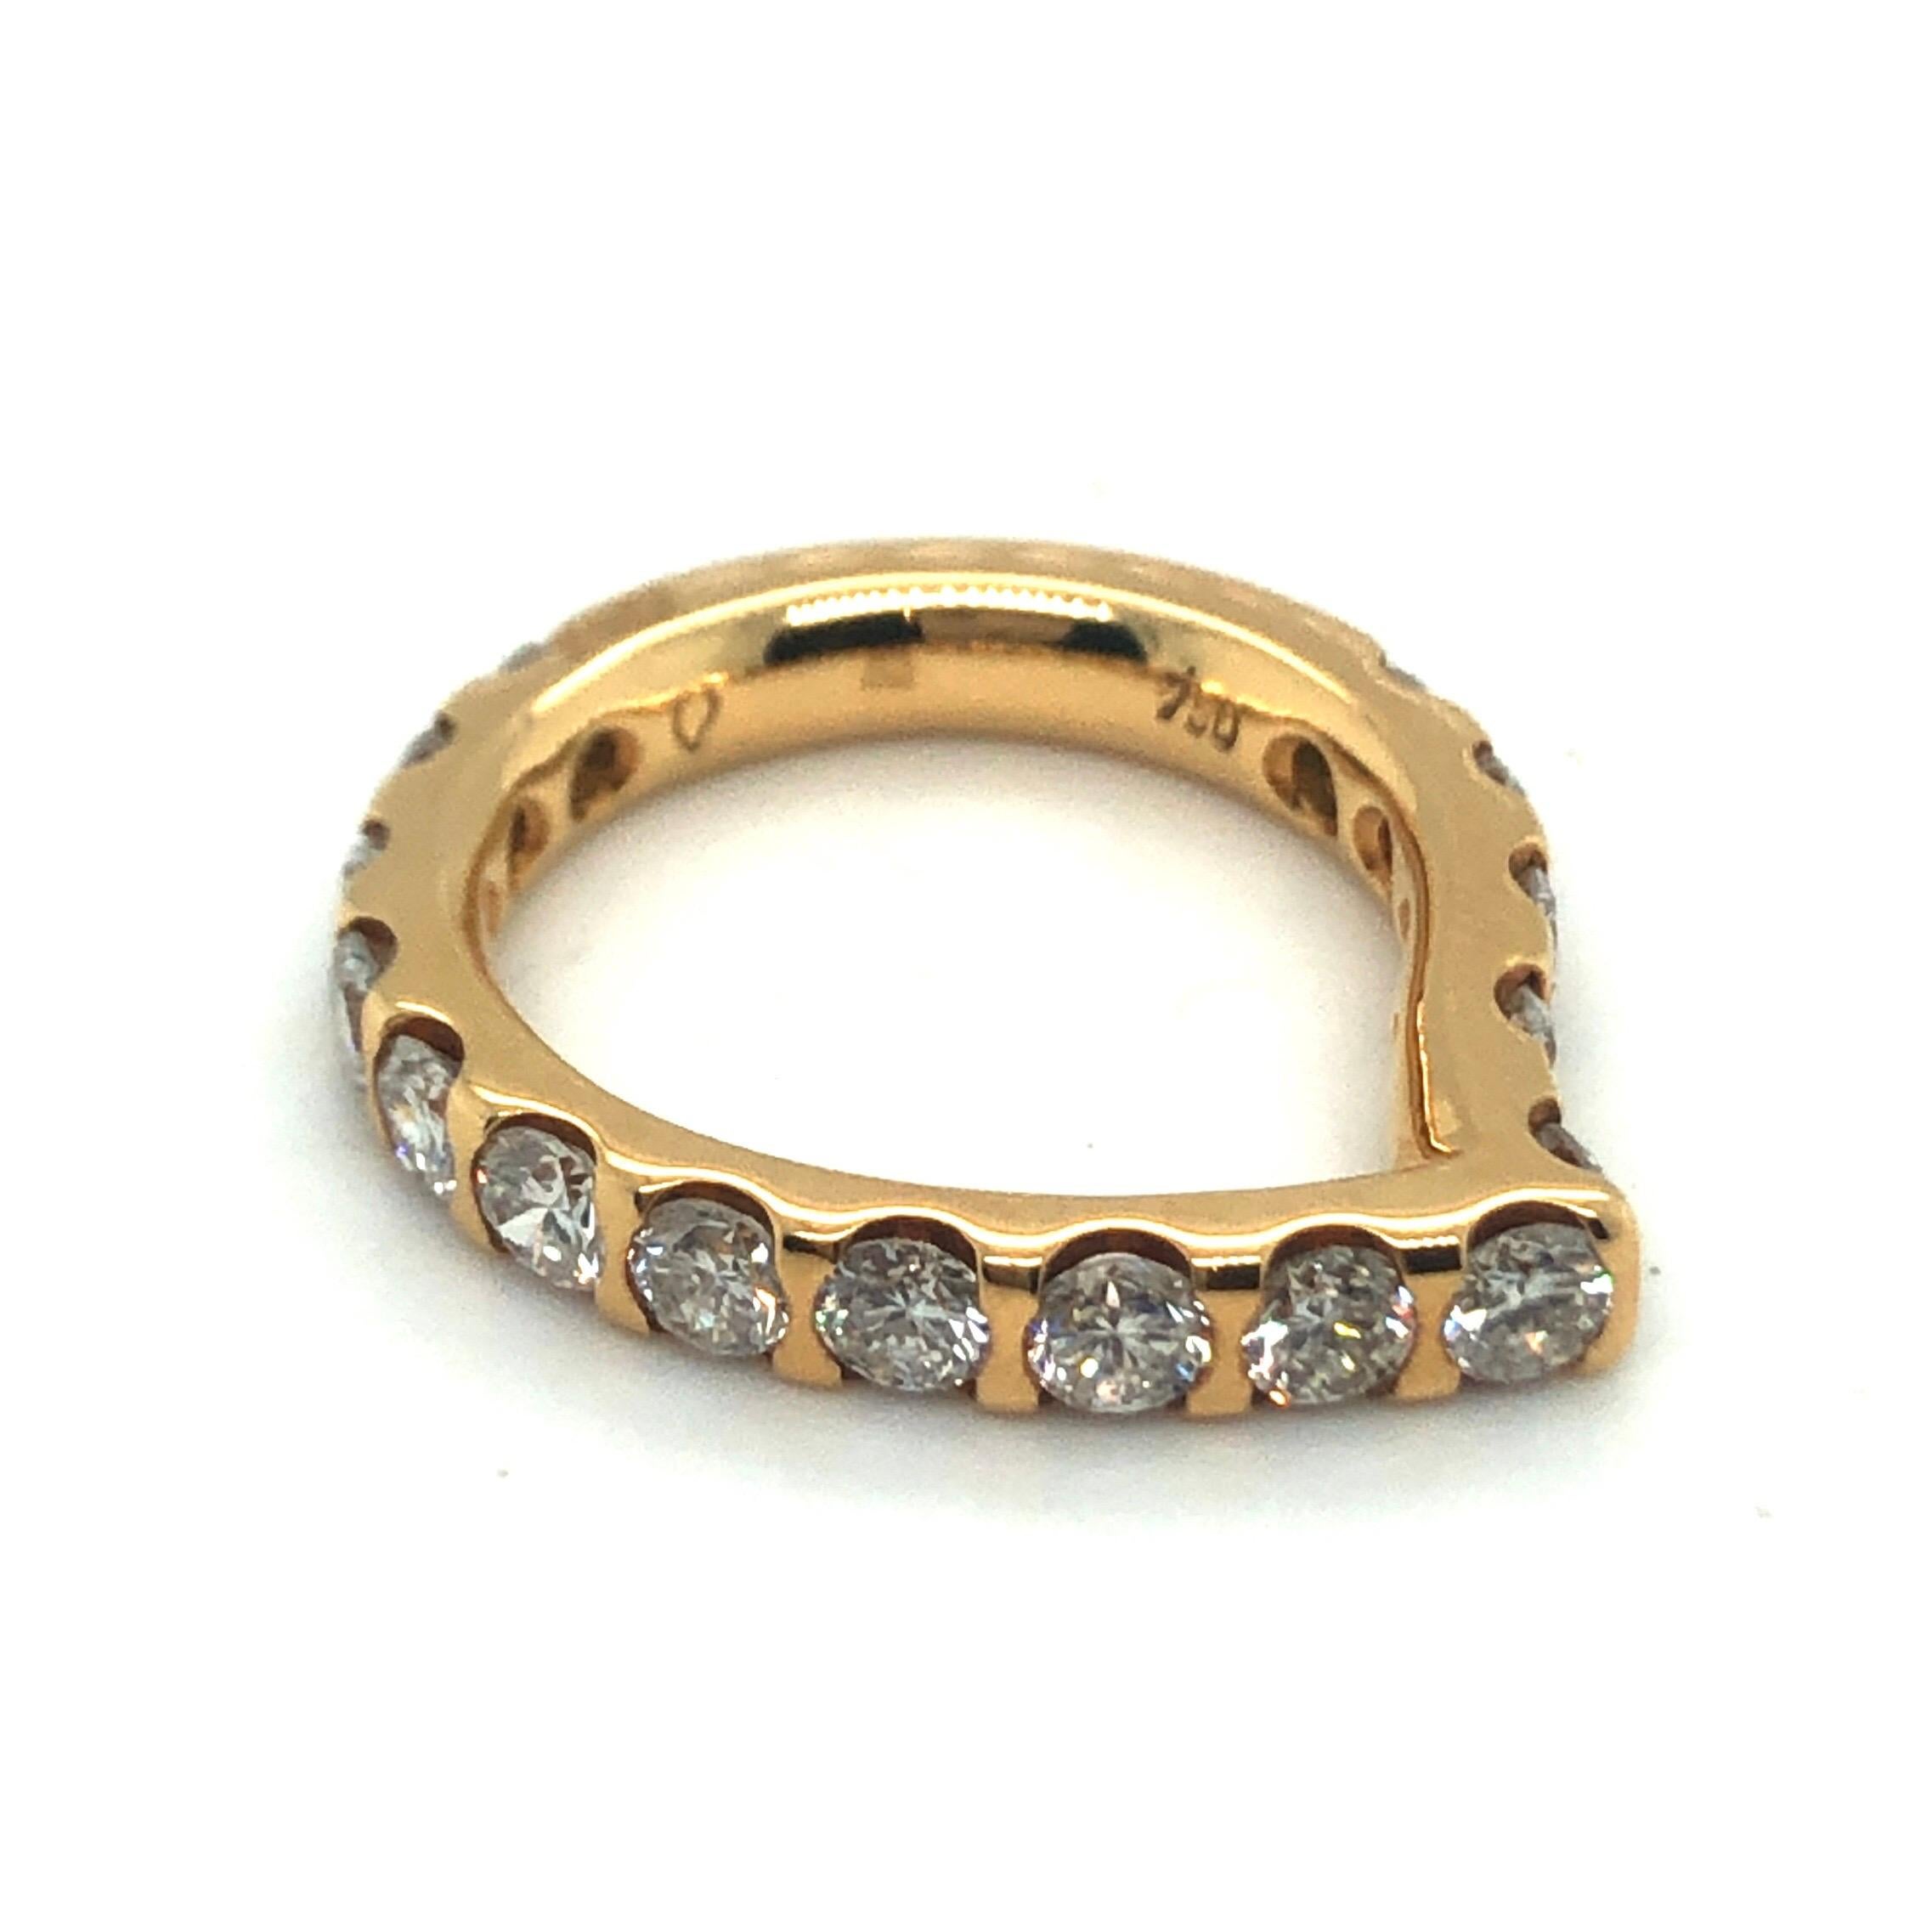 18 karat yellow gold diamond 'Drop' ring by German designer Tamara Comolli.
This fancy asymmetric drop-shaped band ring is crafted in 18 karat yellow gold and set with 16 brilliant-cut diamonds totalling circa 1.92 carats.

This jewel is in very